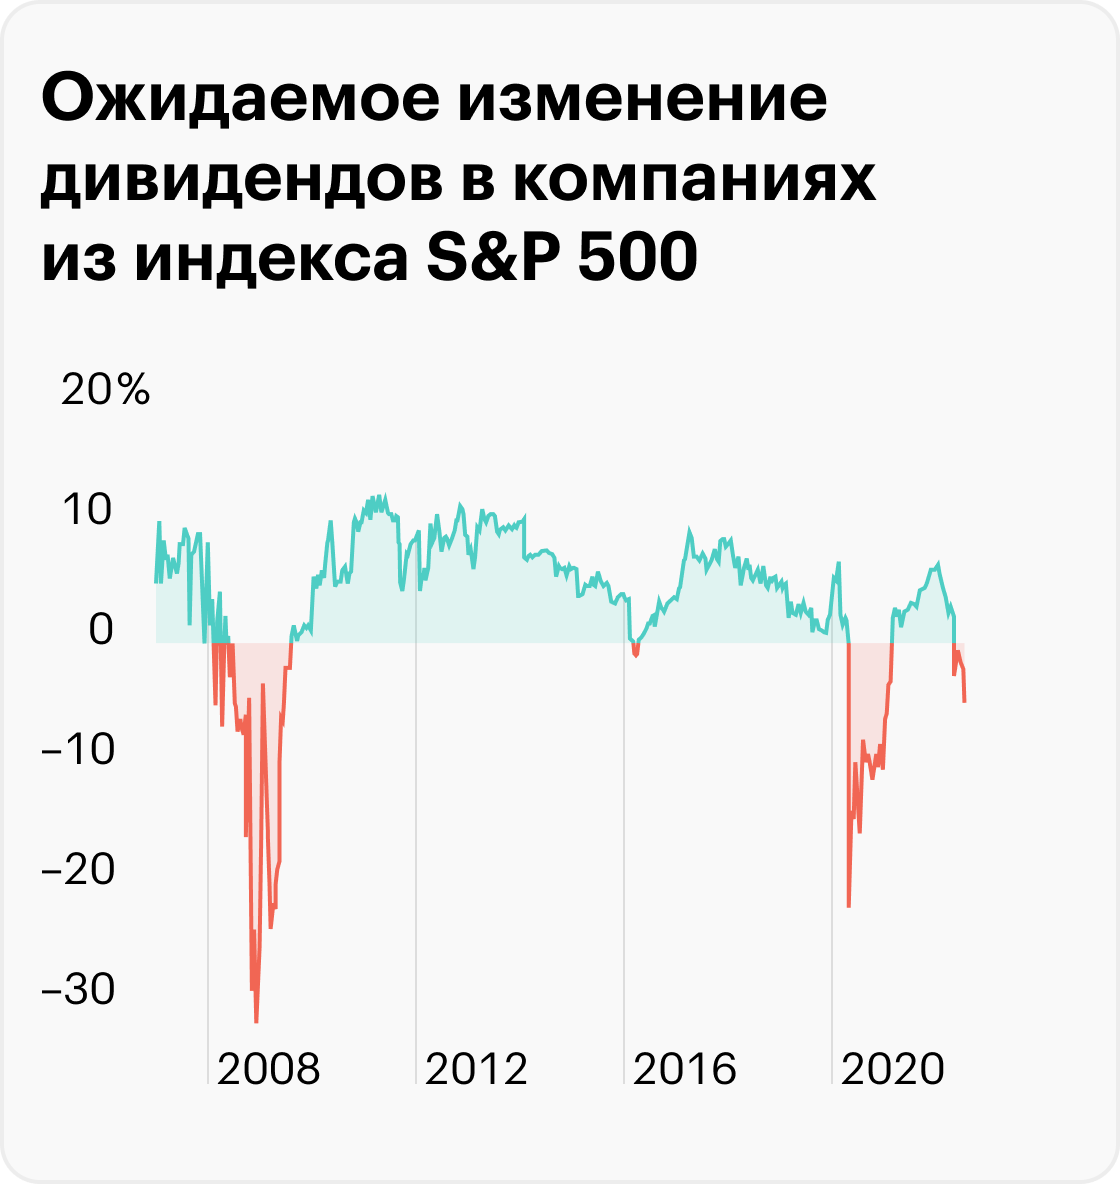 Источник: Daily Shot, Markets expect a decline in dividends next year